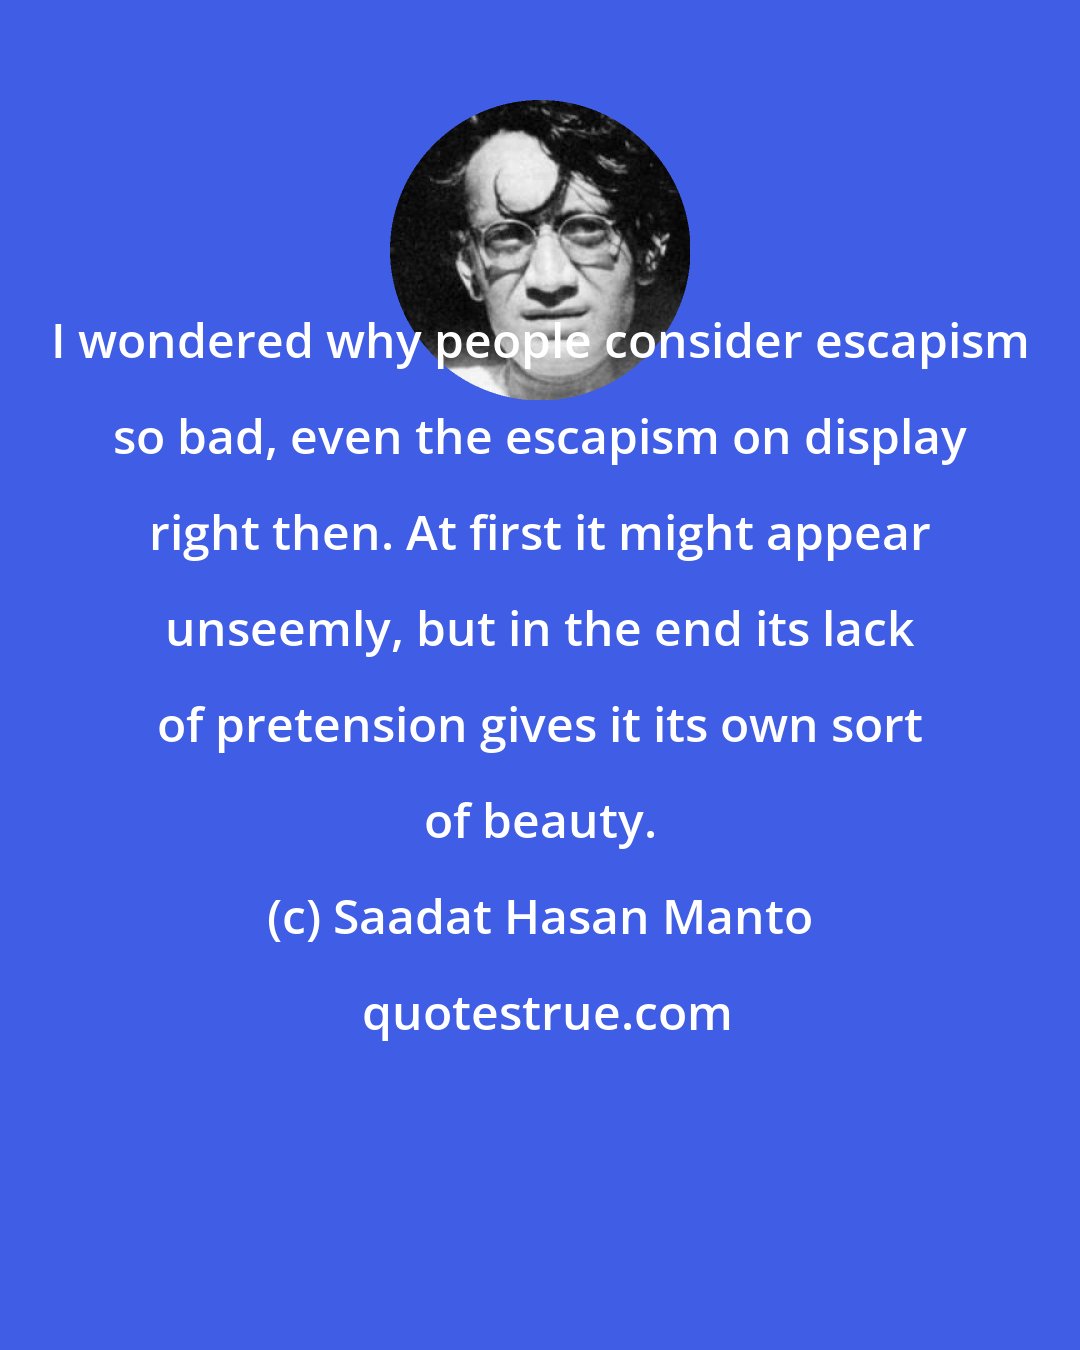 Saadat Hasan Manto: I wondered why people consider escapism so bad, even the escapism on display right then. At first it might appear unseemly, but in the end its lack of pretension gives it its own sort of beauty.